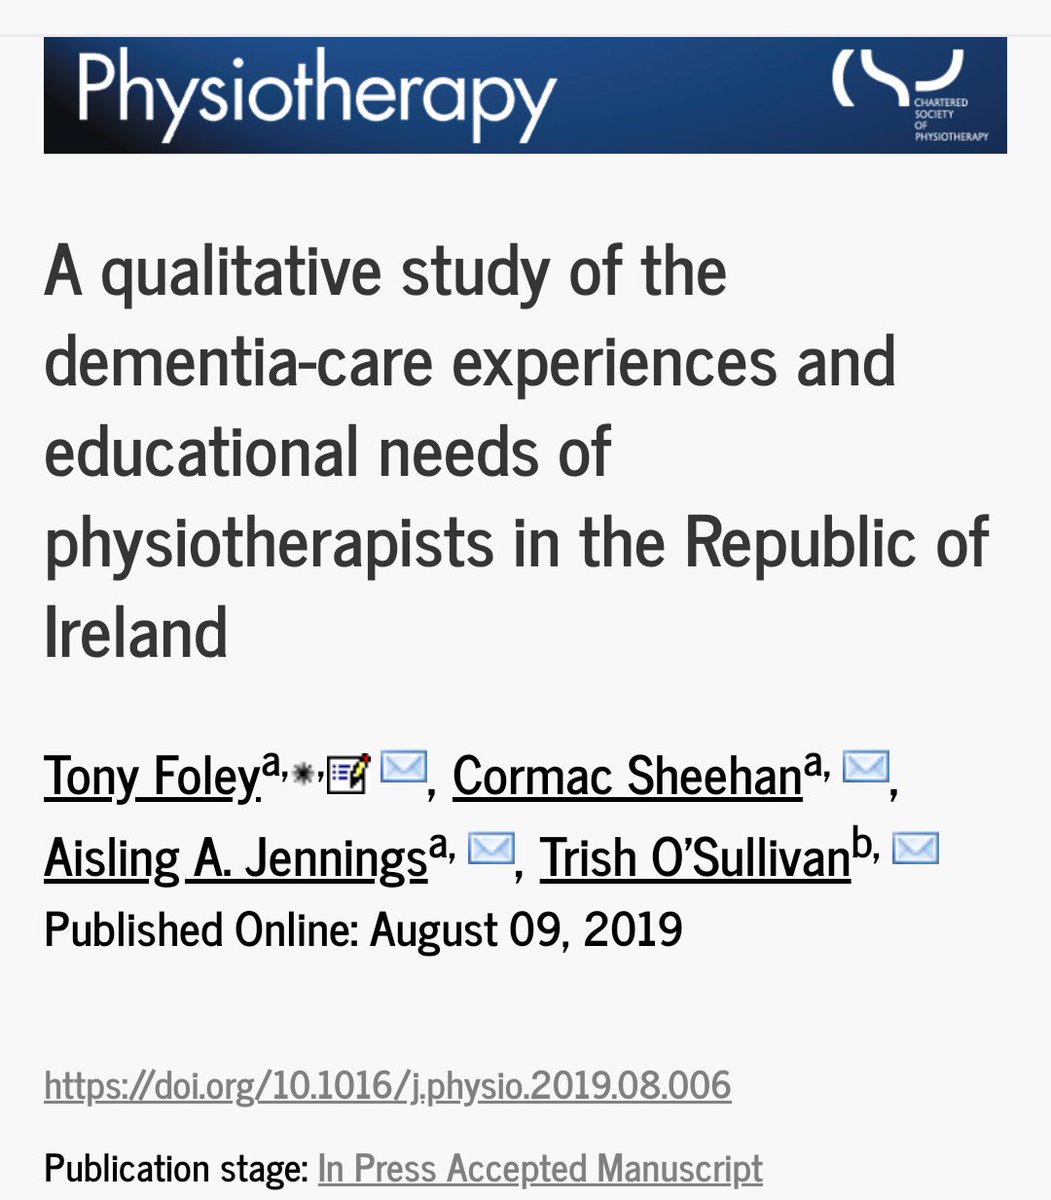 Congratulations to my colleague @TrishLyons4 and team on this excellent paper #dementia #researchledteaching @uccphysio